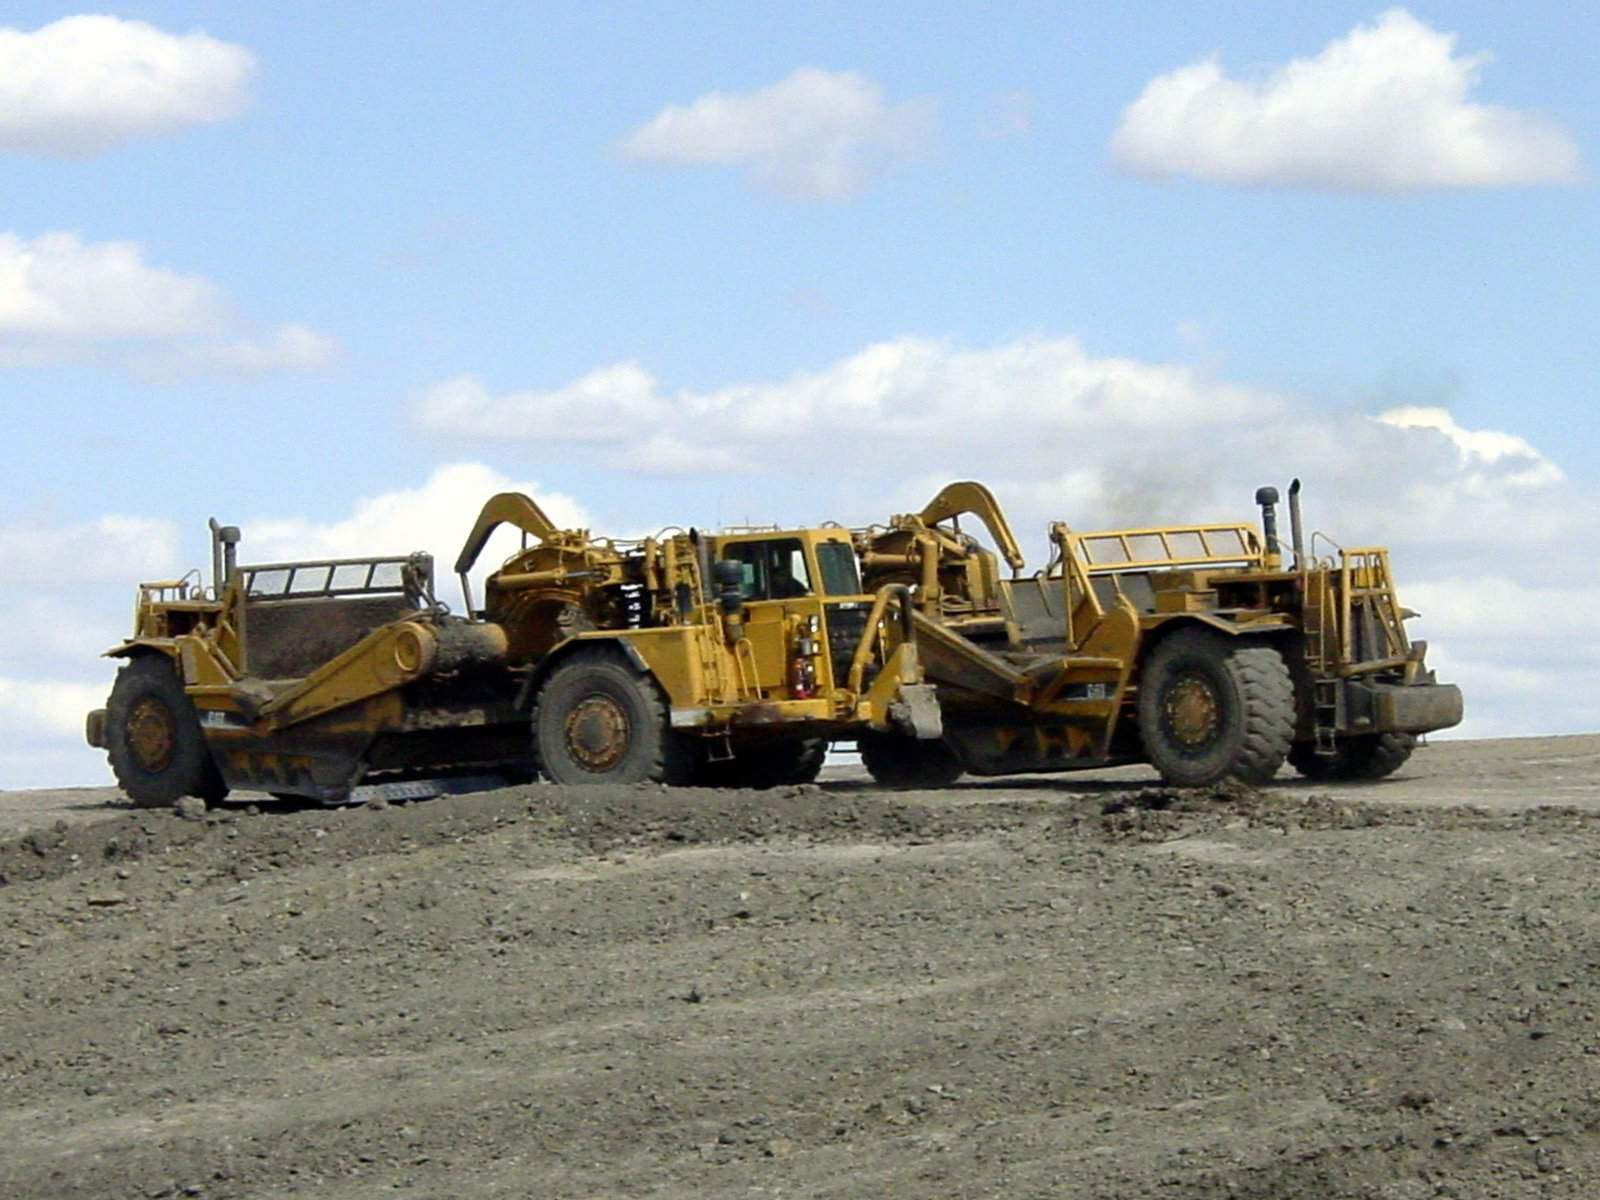 Canada’s Lundin Mining seeks to acquire Nevsun Resources for $1bn